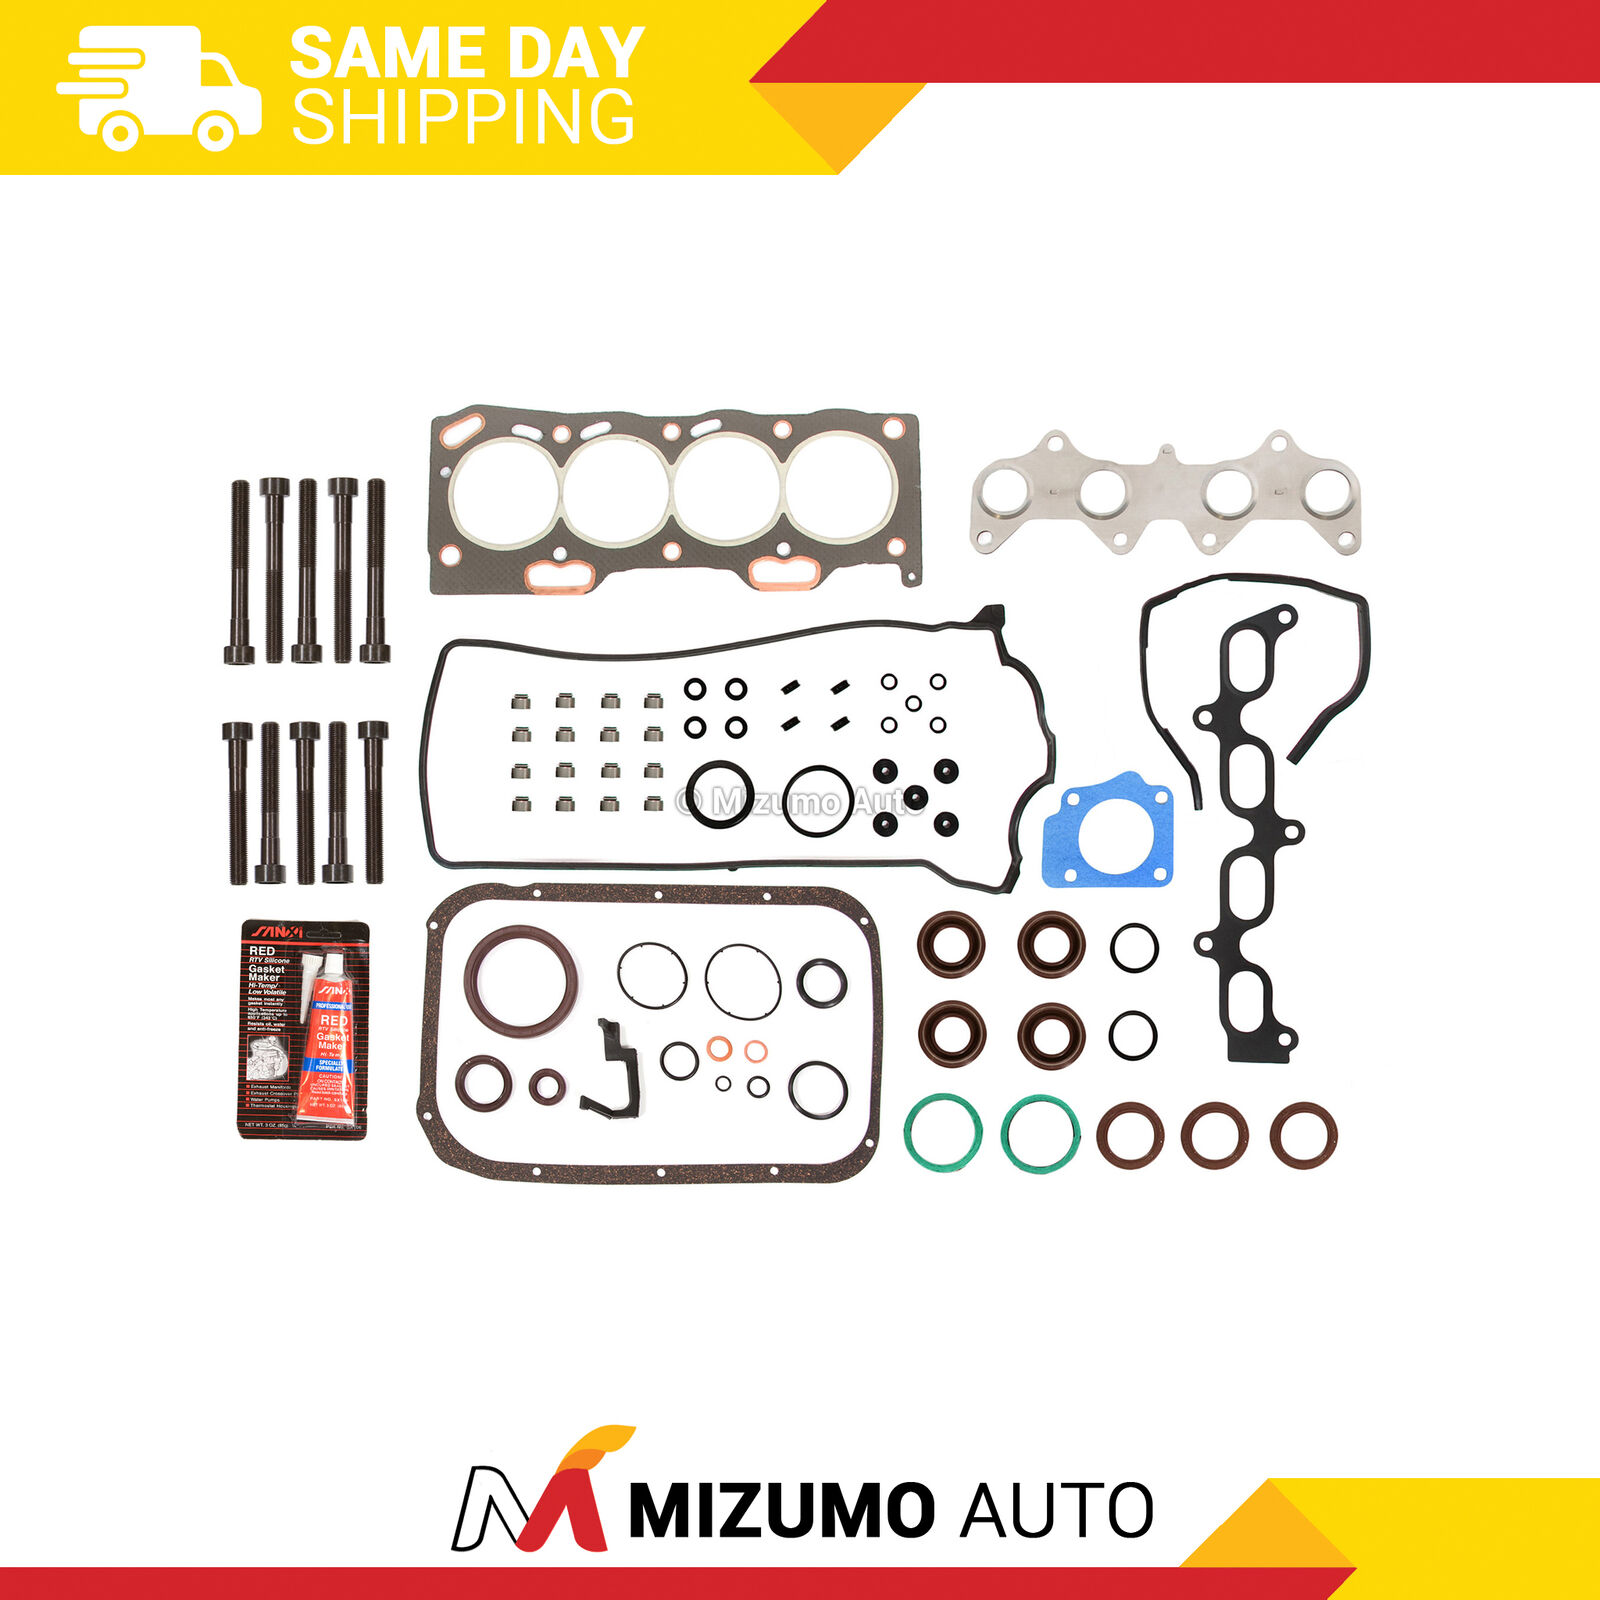 Full Gasket Set Head Bolts Fit 95-98 Toyota Paseo 1.5L DOHC 5EFE